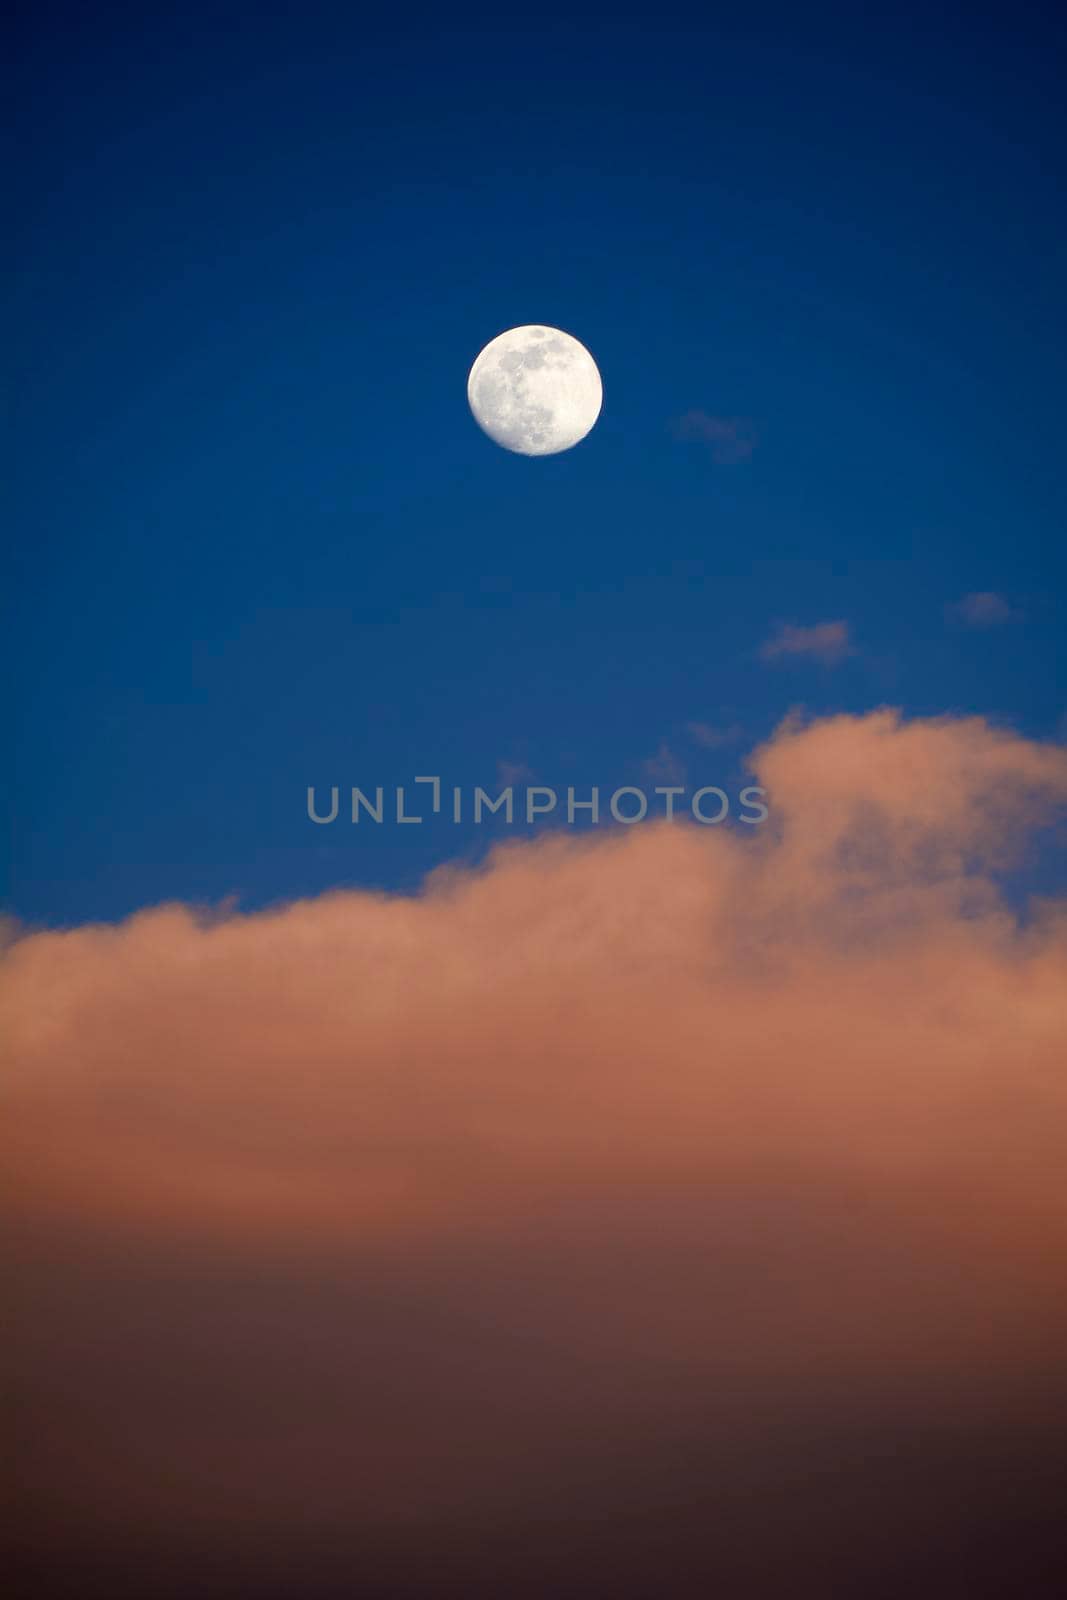 Moon in blue sky with white clouds, blue sky, empty space, heaven